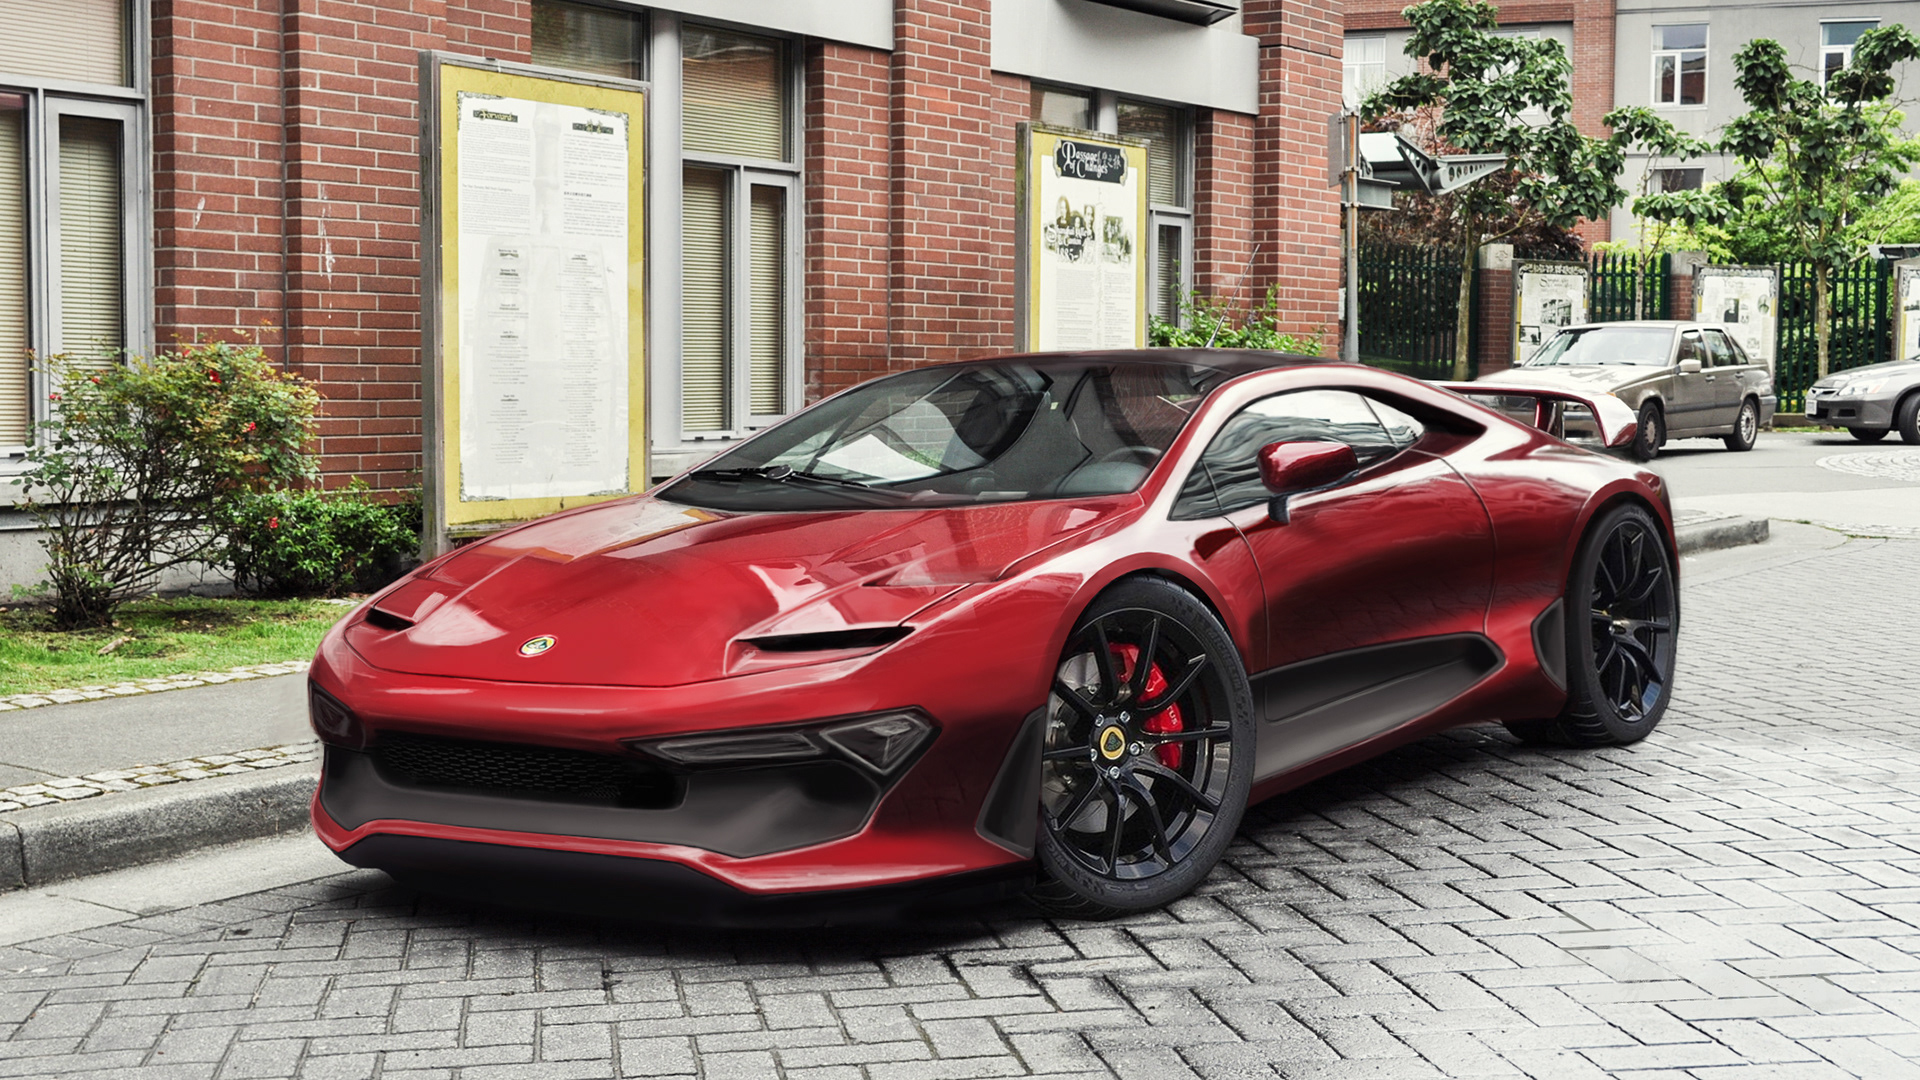 New Lotus Esprit Study Envisions The Brand S 2020 Flagship Images, Photos, Reviews